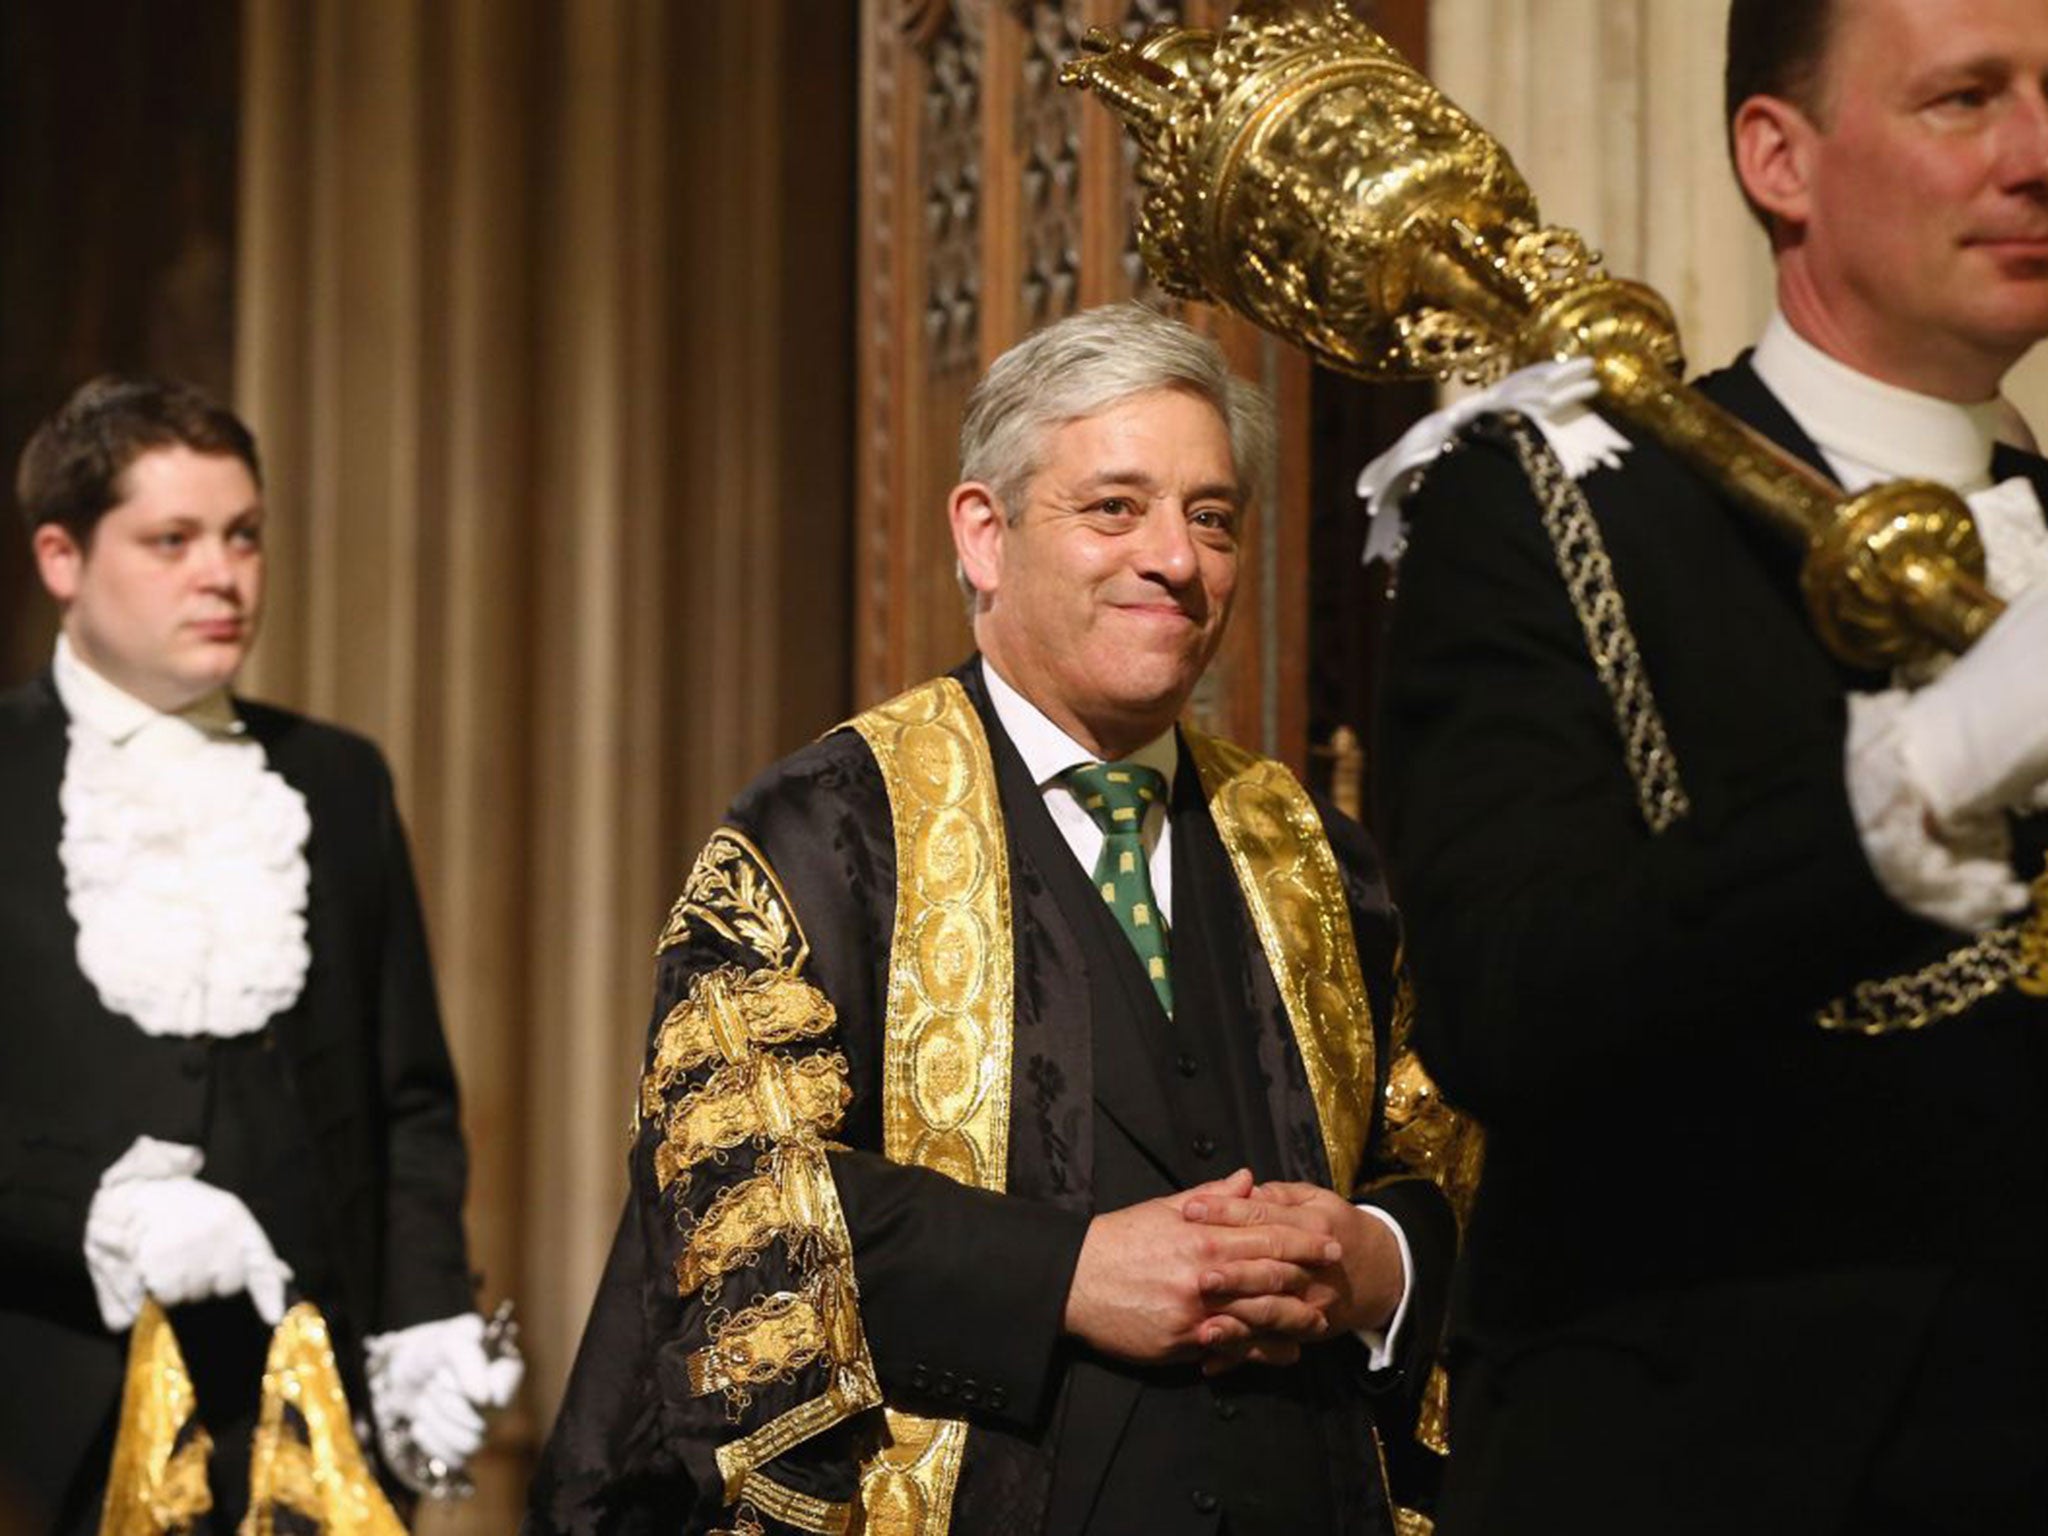 John Bercow walks through the Members' Lobby after the Queen's Speech at the State Opening of Parliament (Getty)